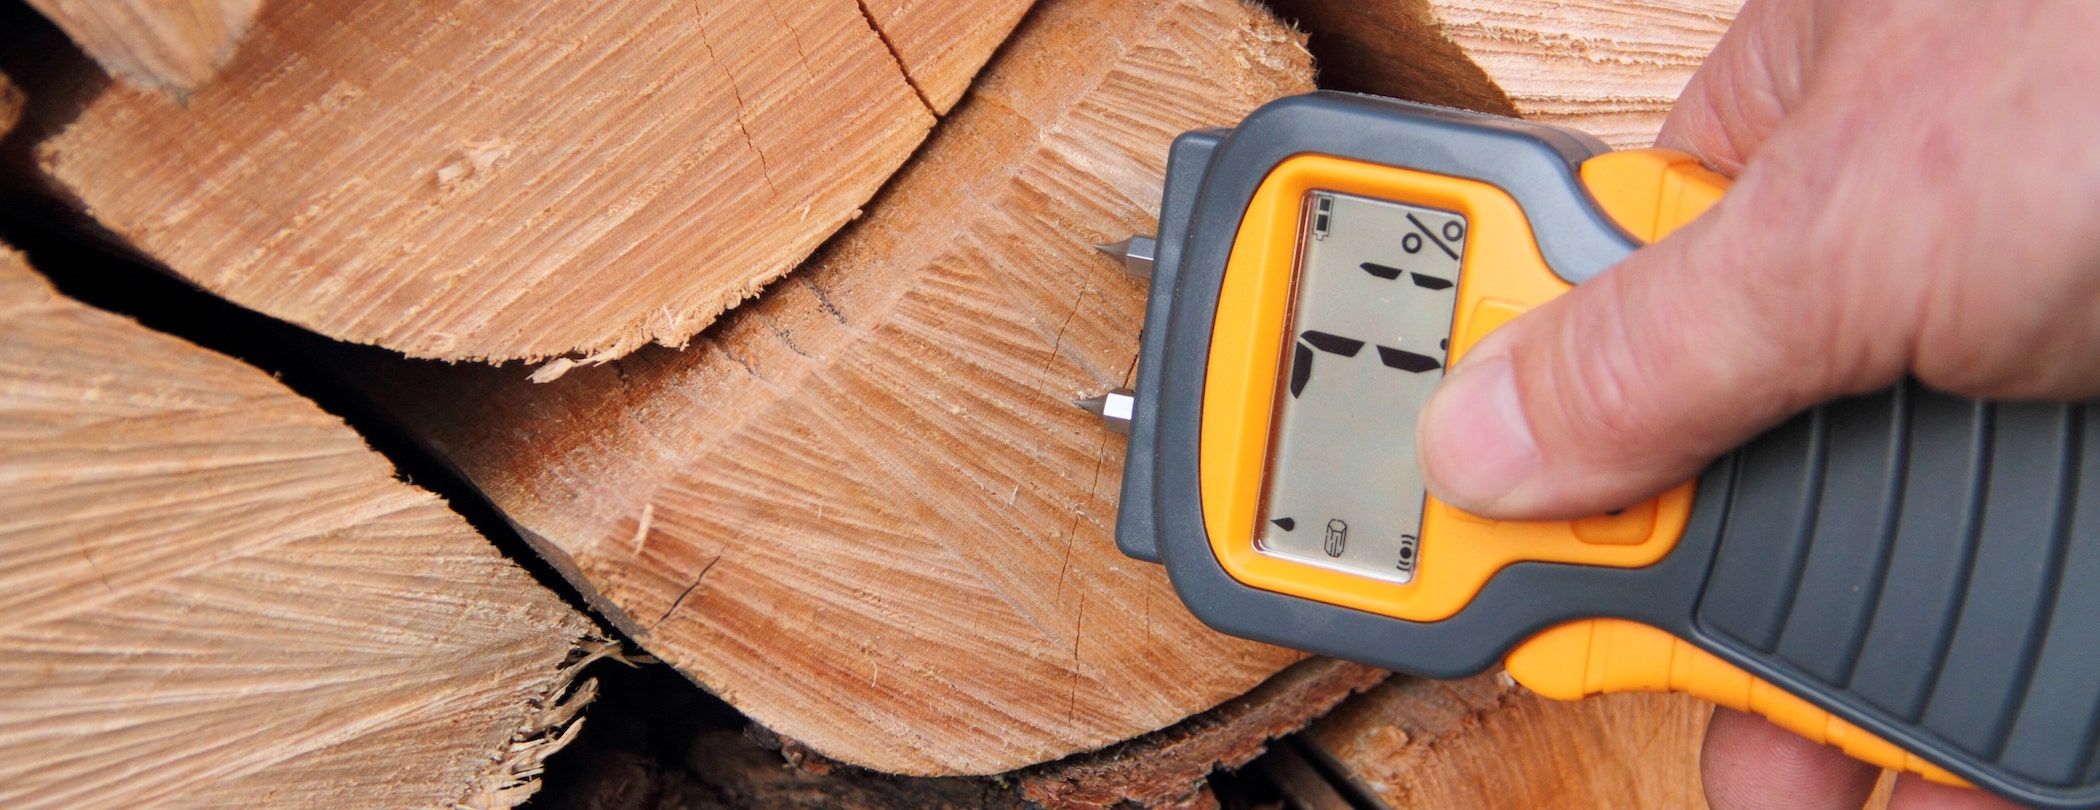 wood_moisture_meter_check_moisture_content_of_wood